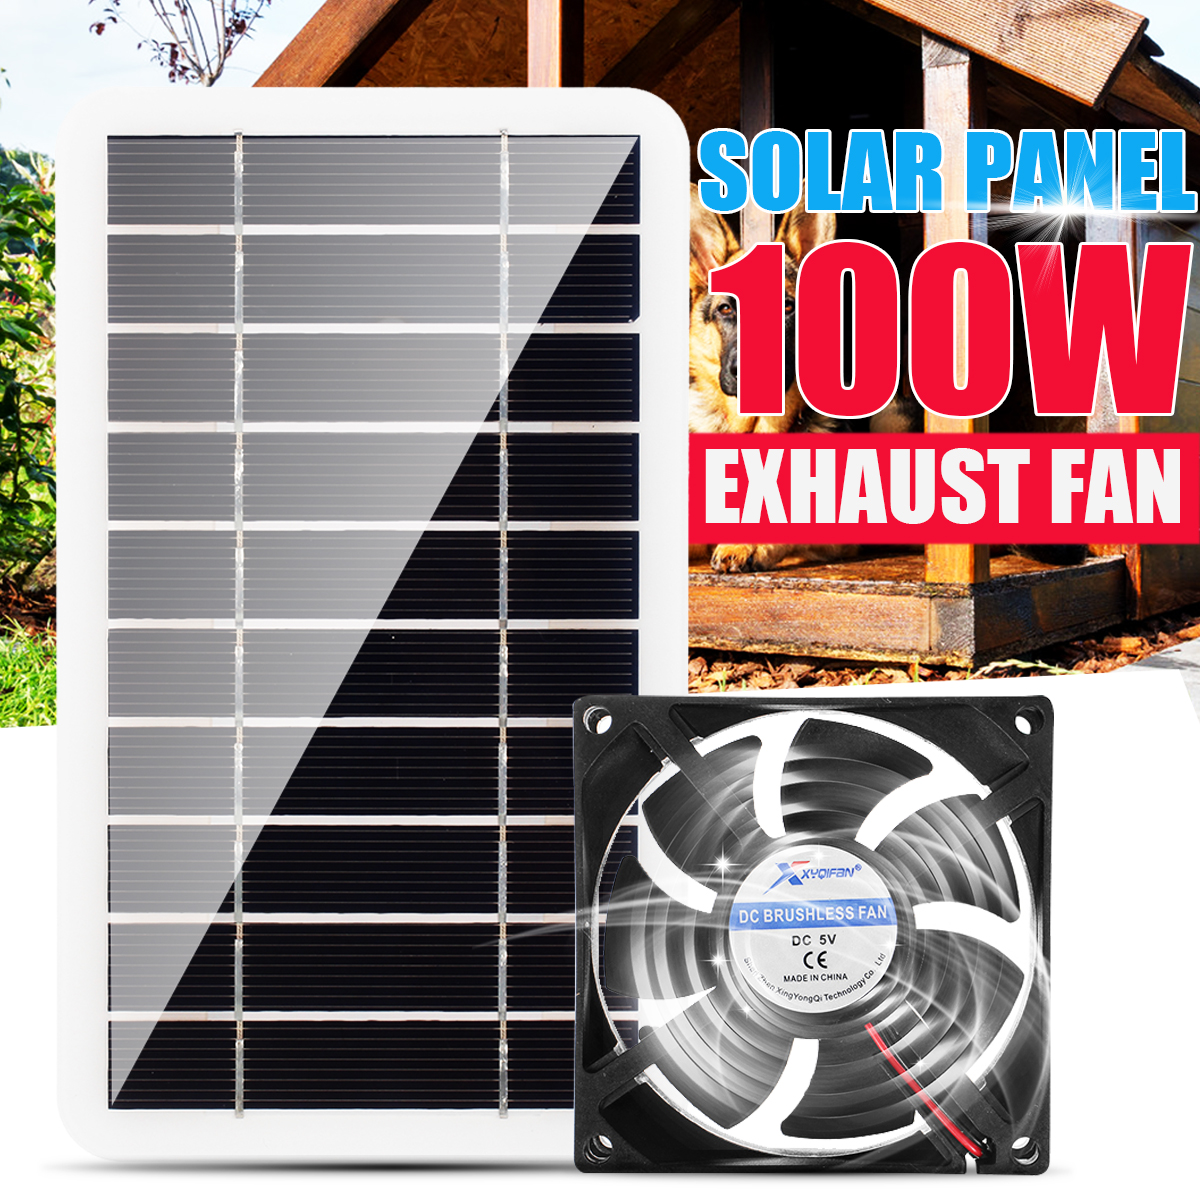 100W-Portable-Solar-Panel-Kit-Dual-DC-5V-USB-Charger-Kit-Solar-Power-Controller-with-Fans-1905897-2